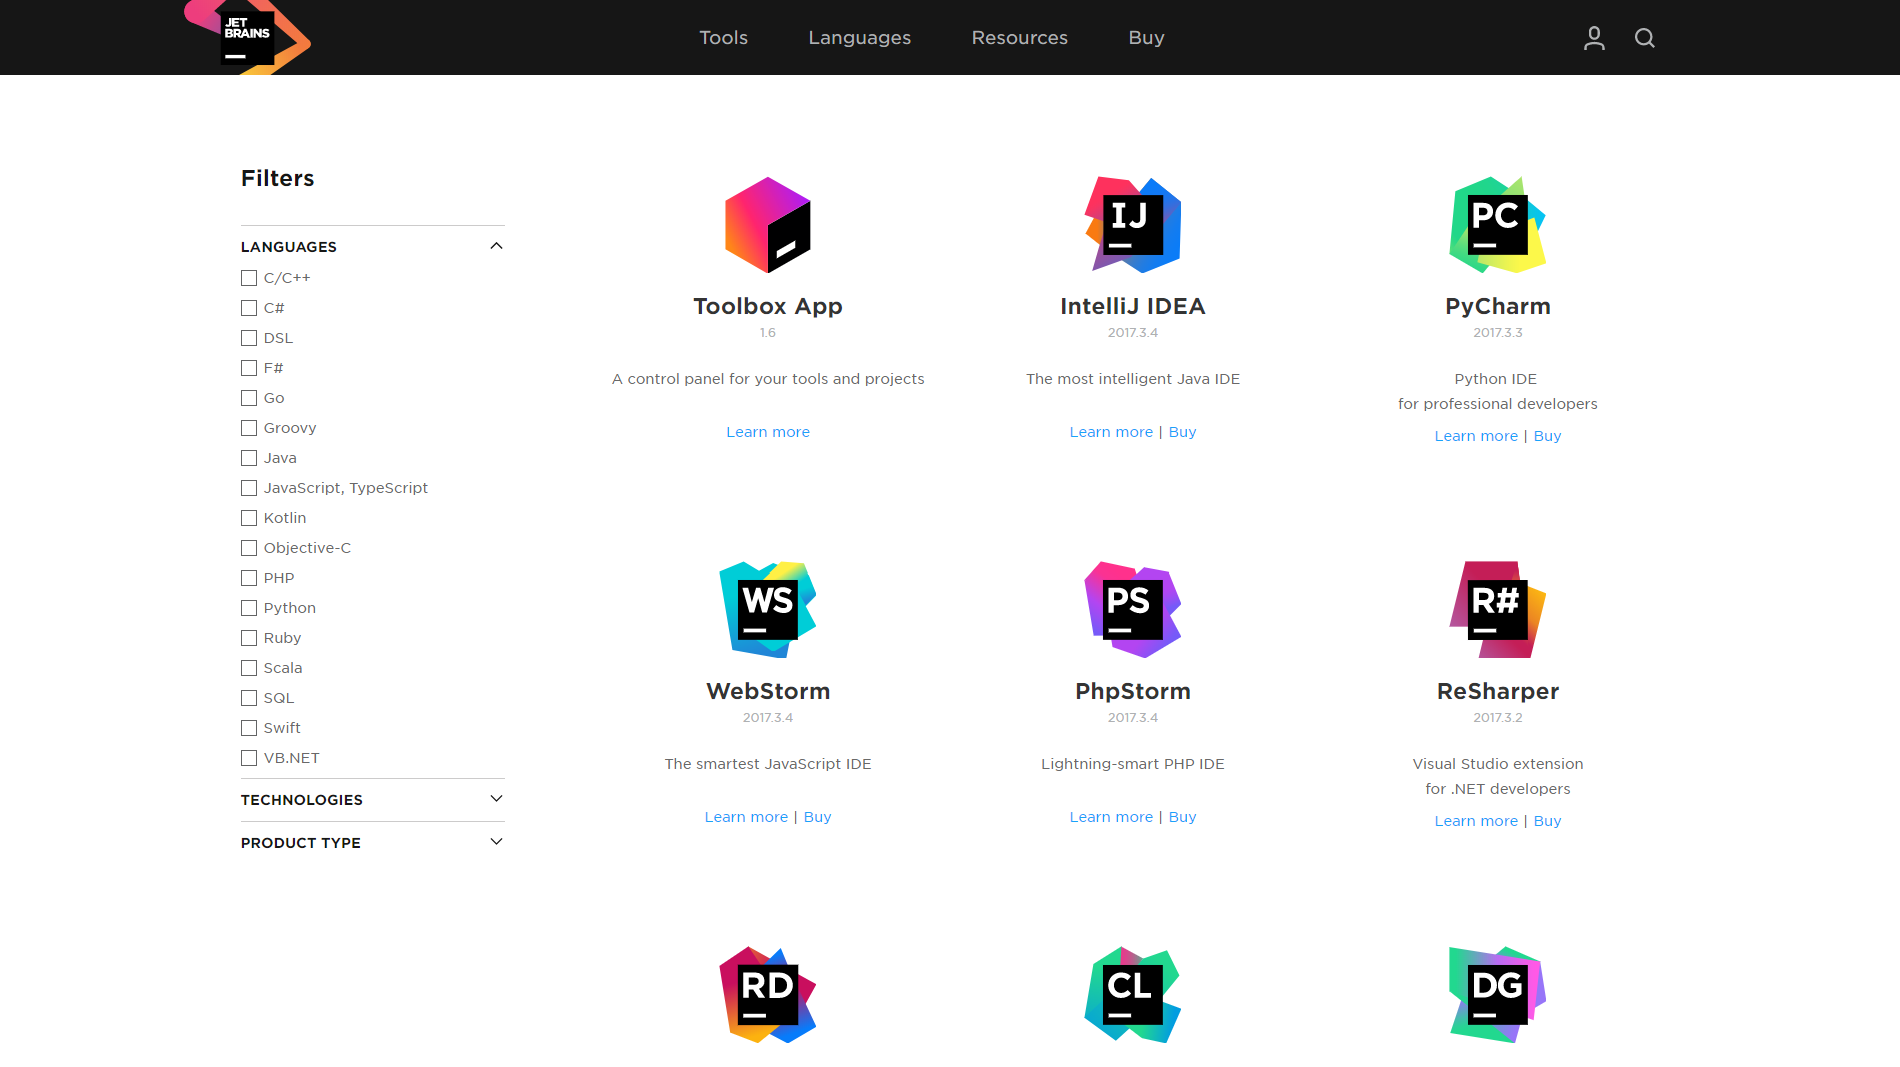 JetBrains products